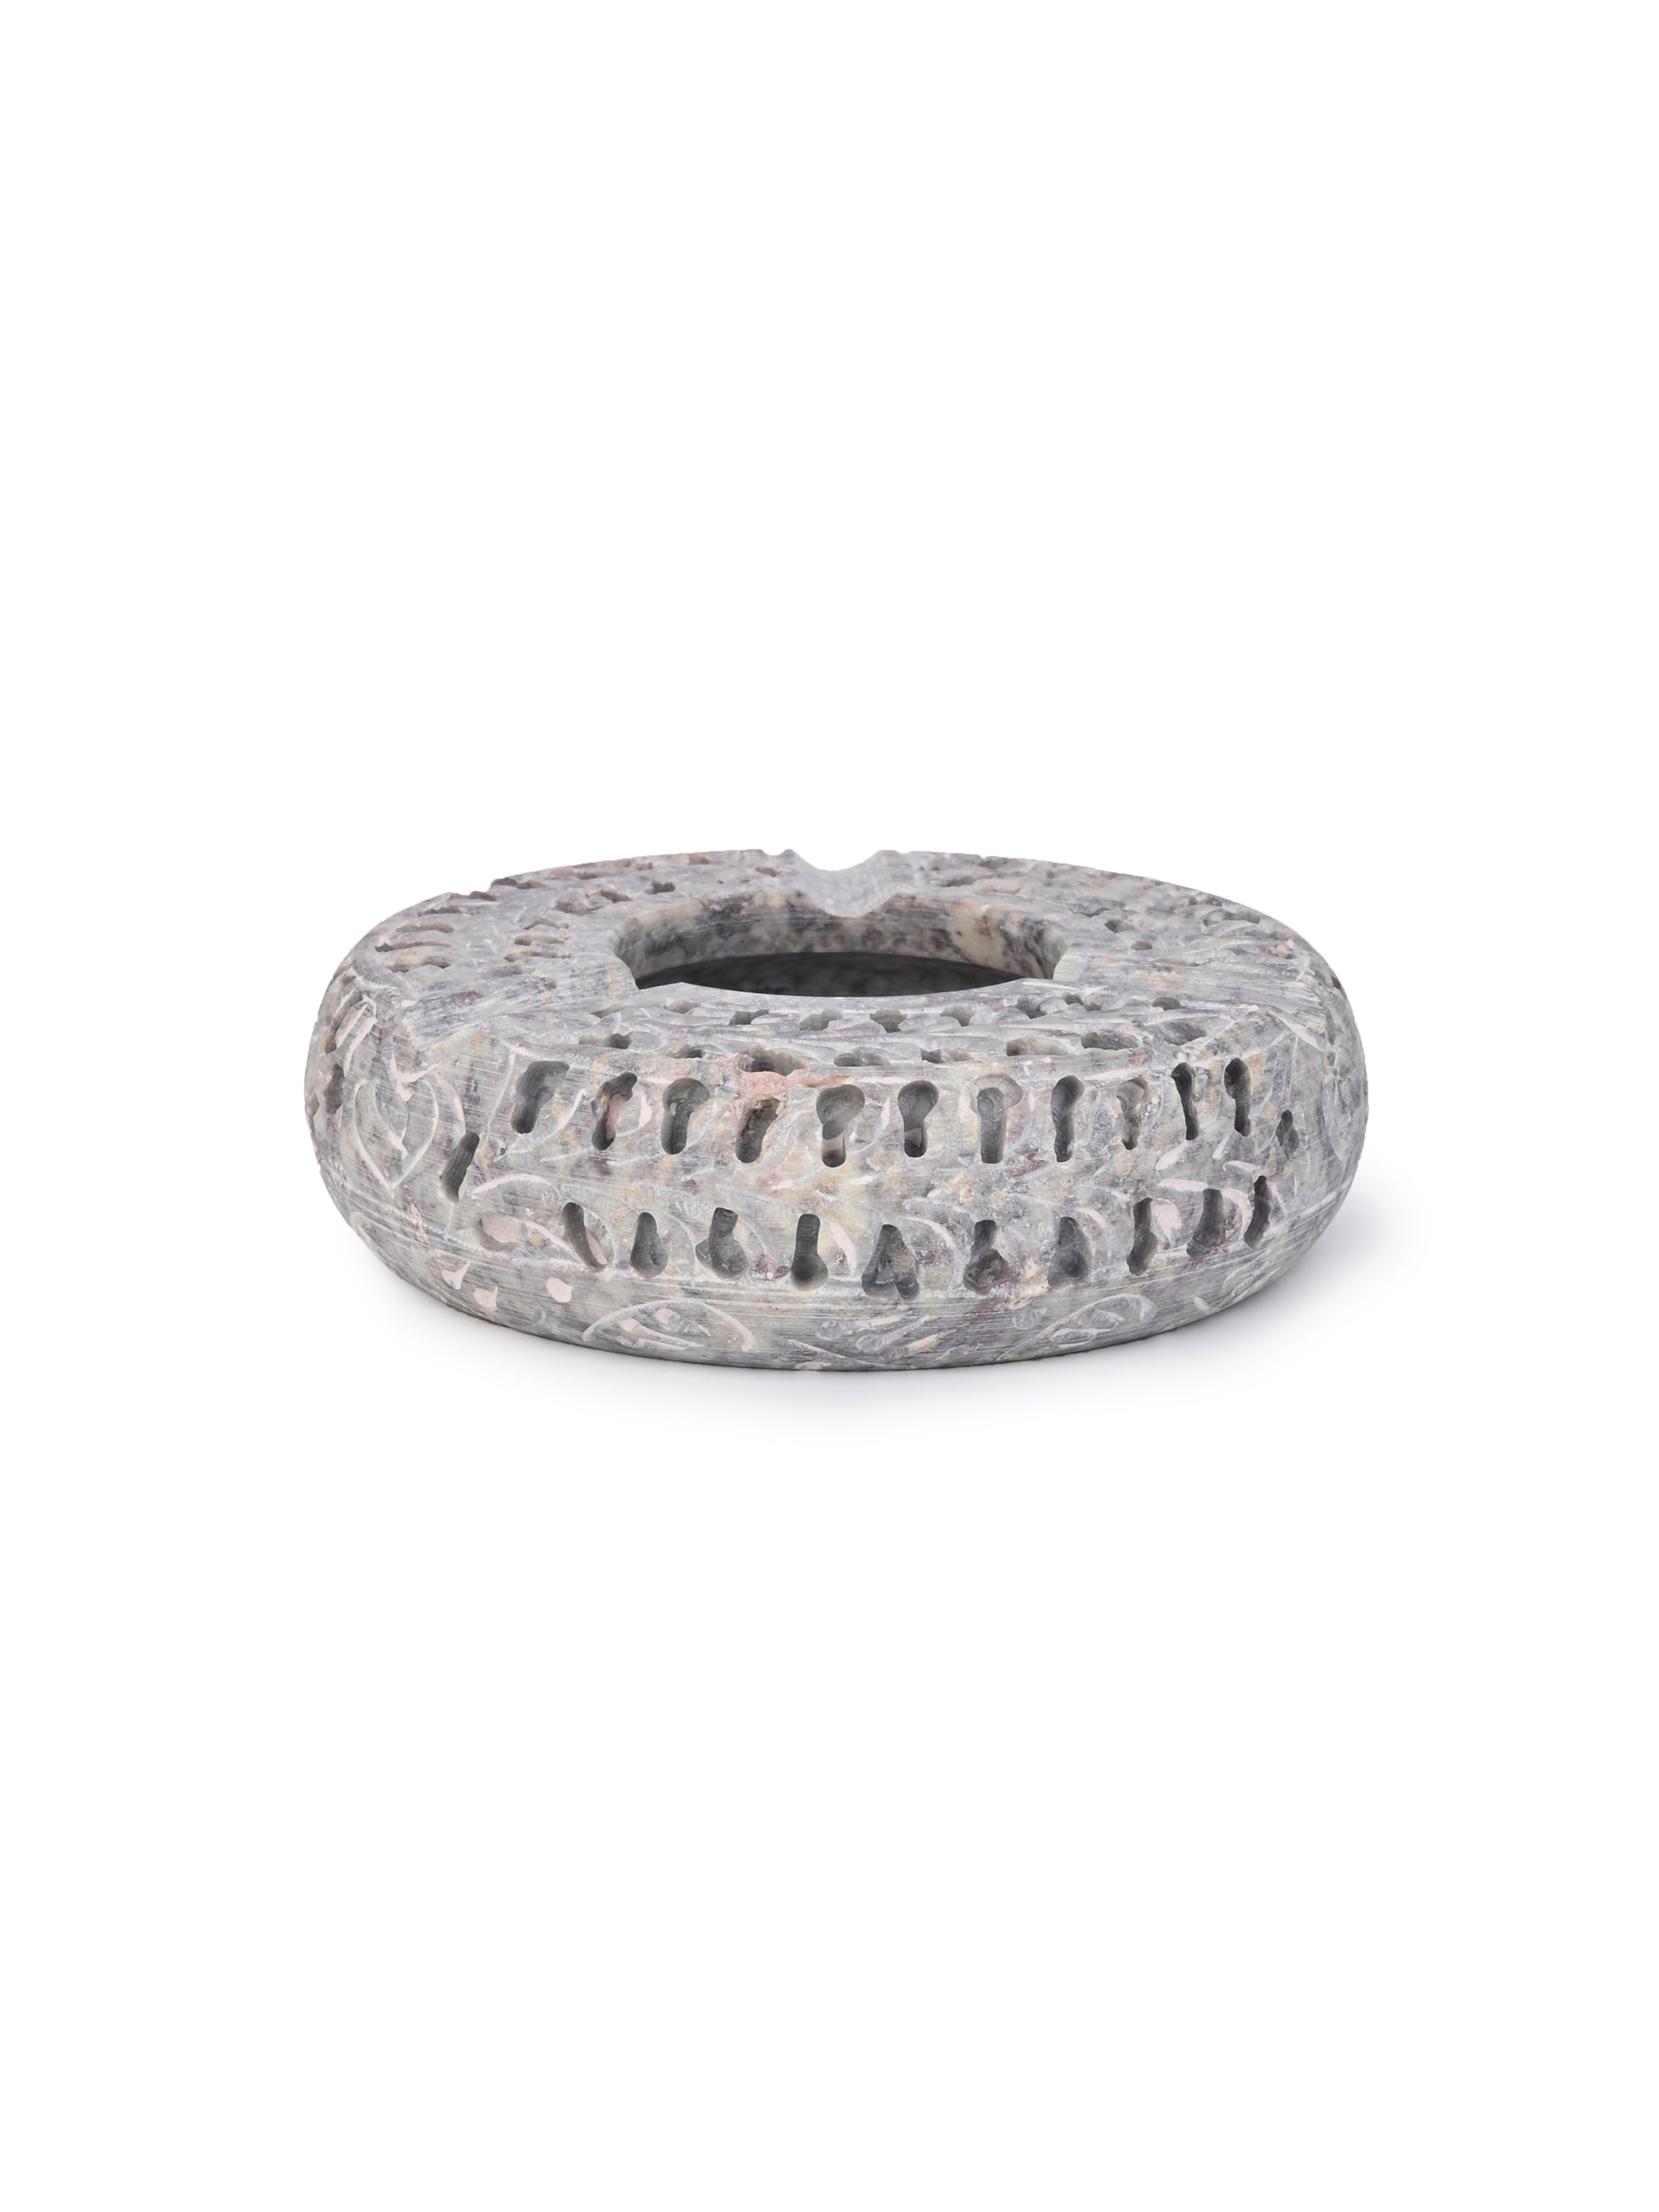 Stone Crafted Ashtray for Home and Office Use